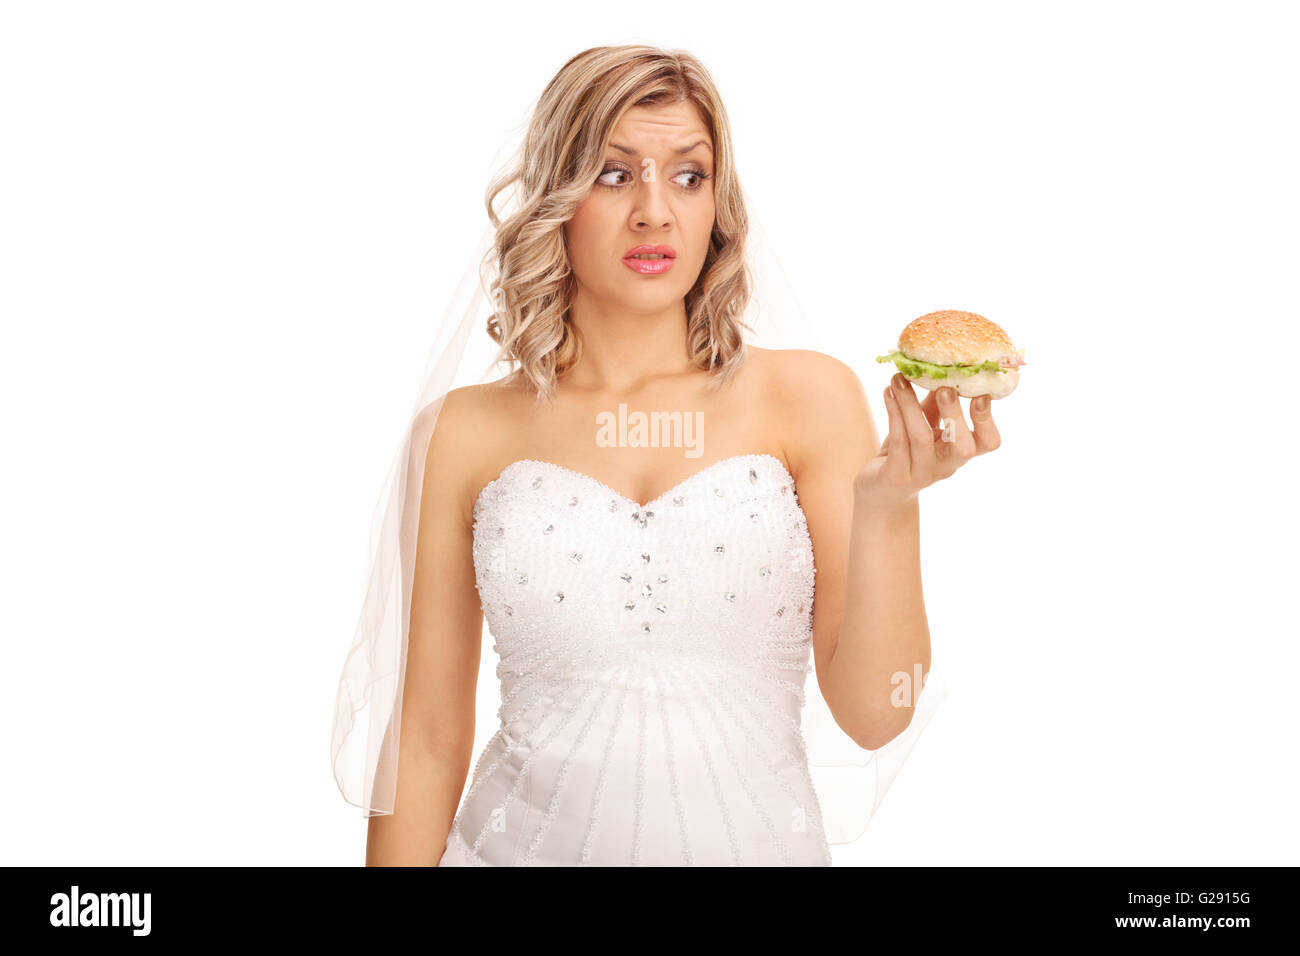 Indecisive bride looking at a tempting sandwich isolated on white background Stock Photo